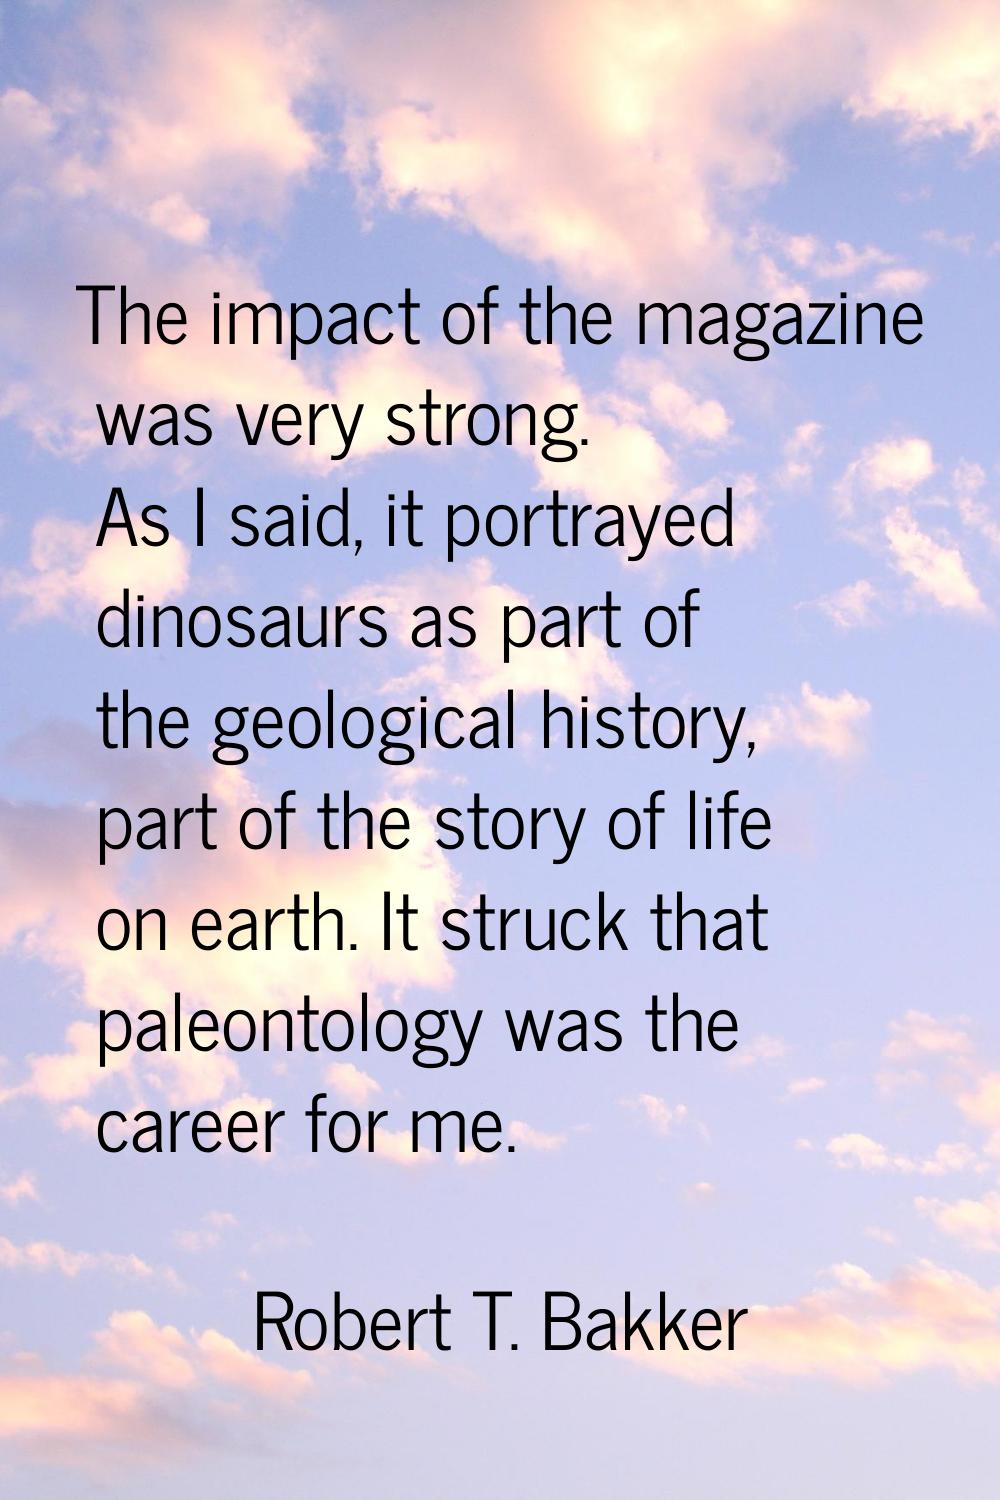 The impact of the magazine was very strong. As I said, it portrayed dinosaurs as part of the geolog